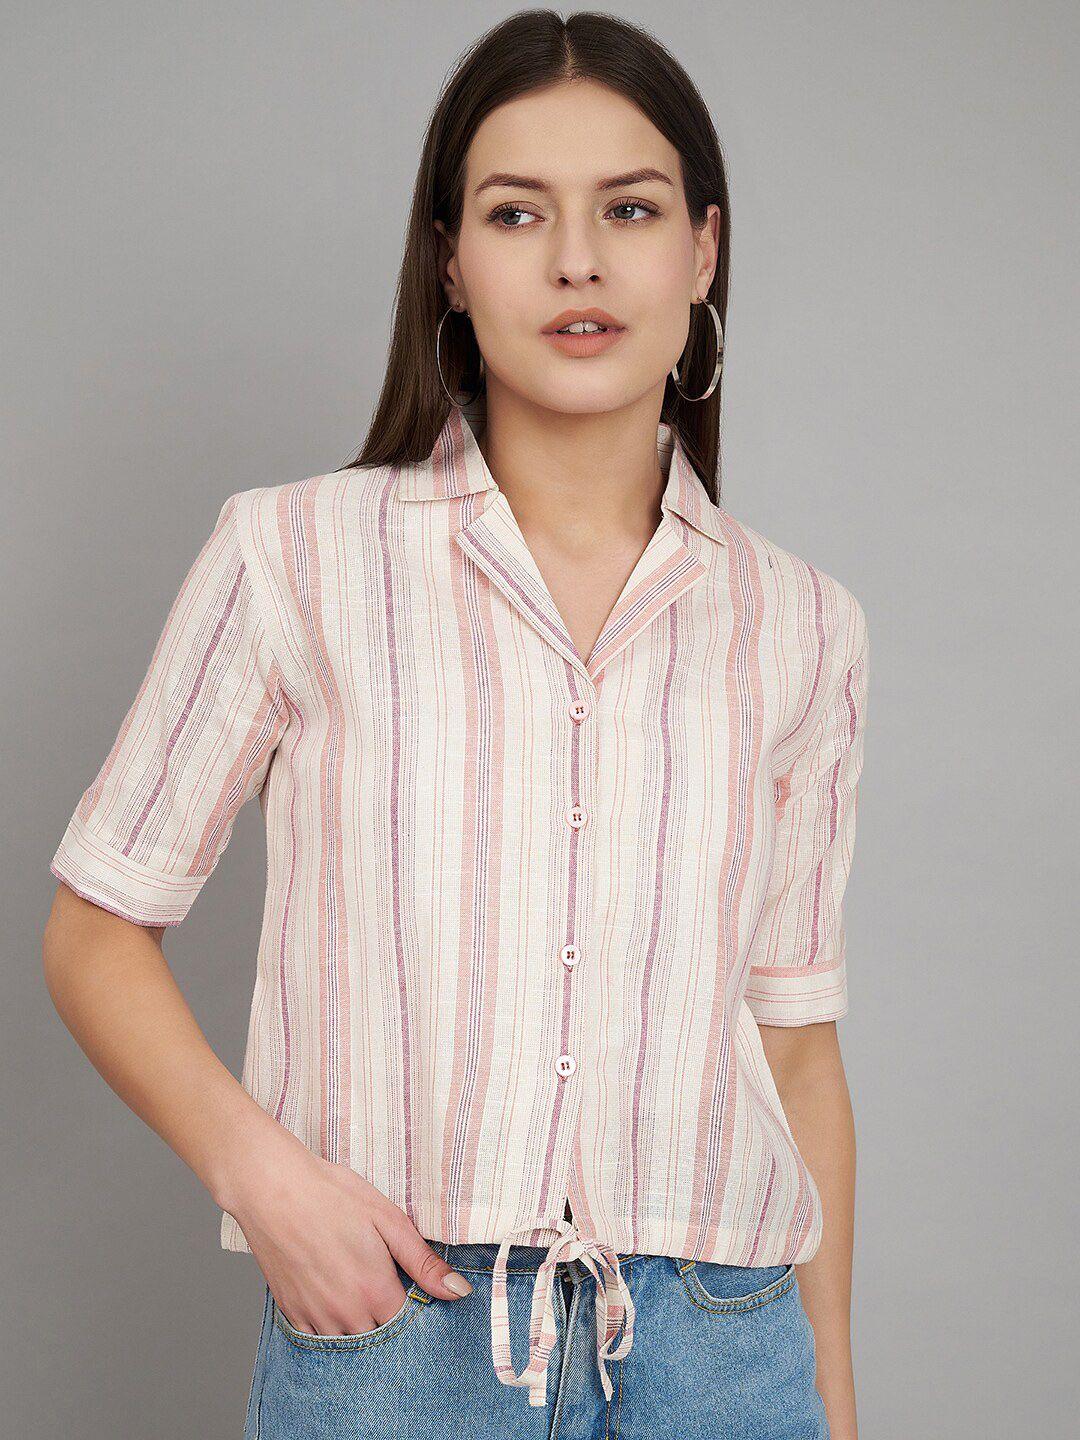 fab star striped cotton shirt style top